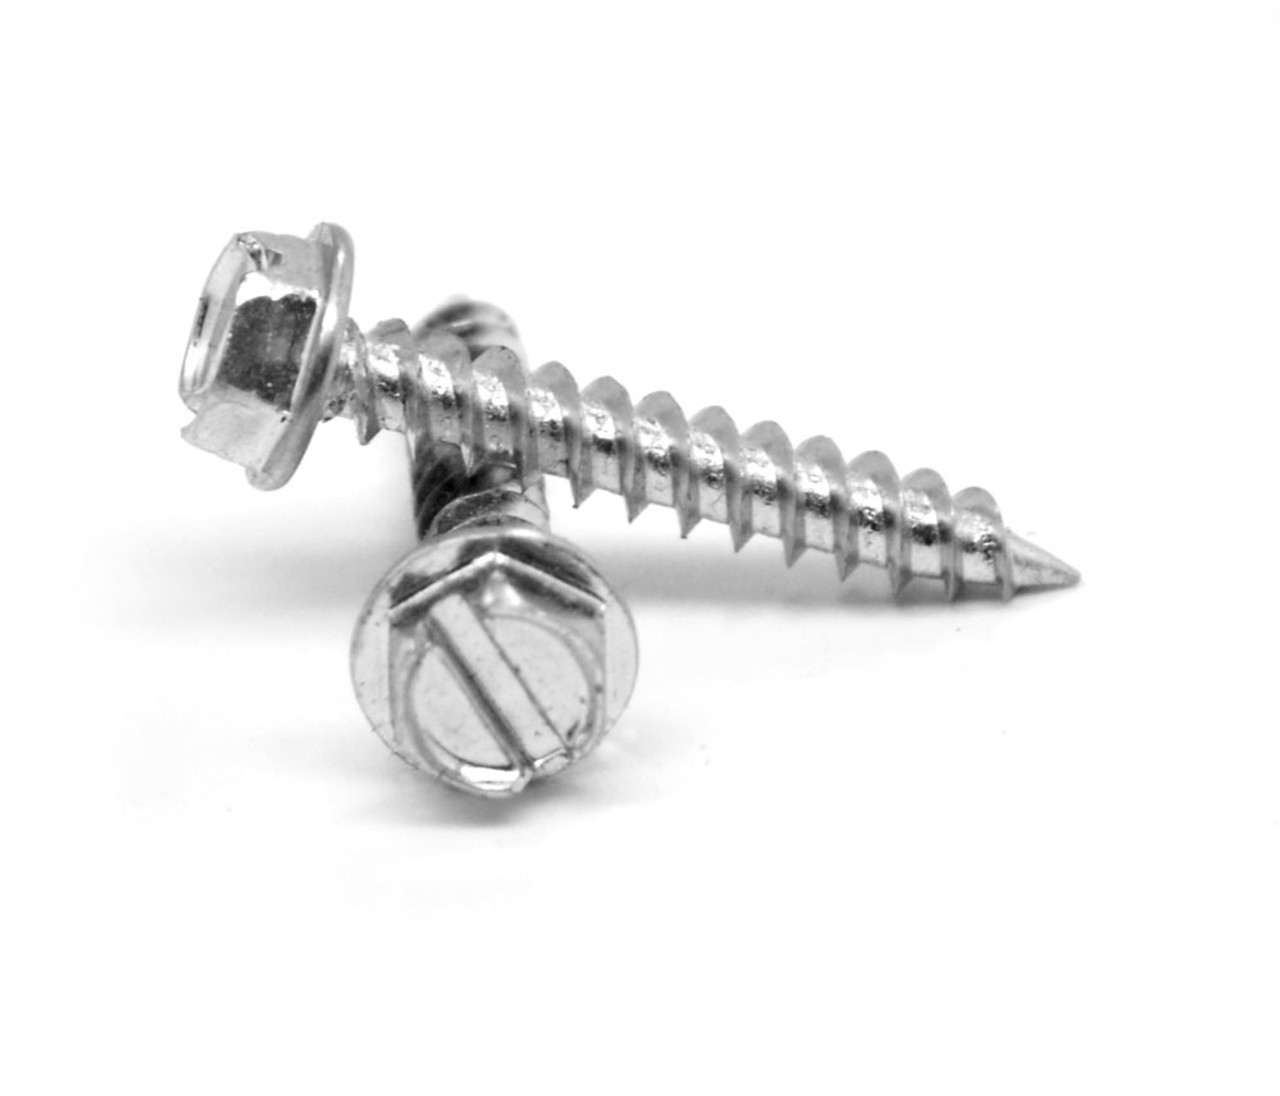 #14-14 x 3" Sheet Metal Screw Slotted Hex Washer Head Type AB Low Carbon Steel Zinc Plated